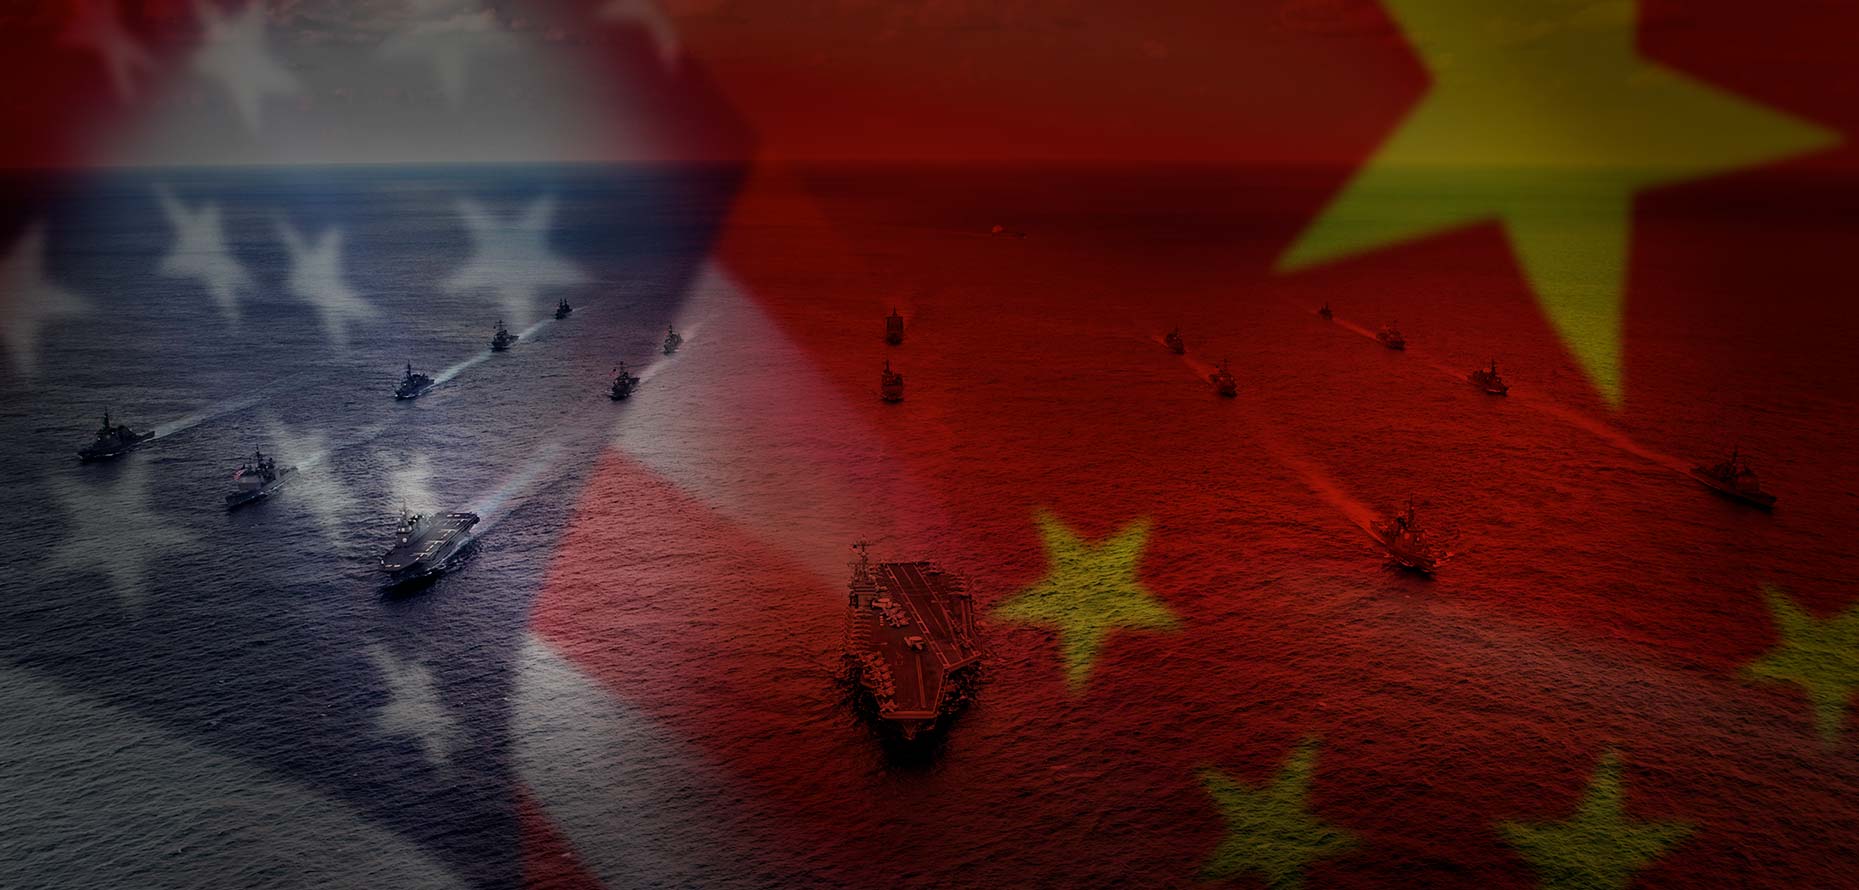 China Warns The U.S. About Crossing “Red Lines”